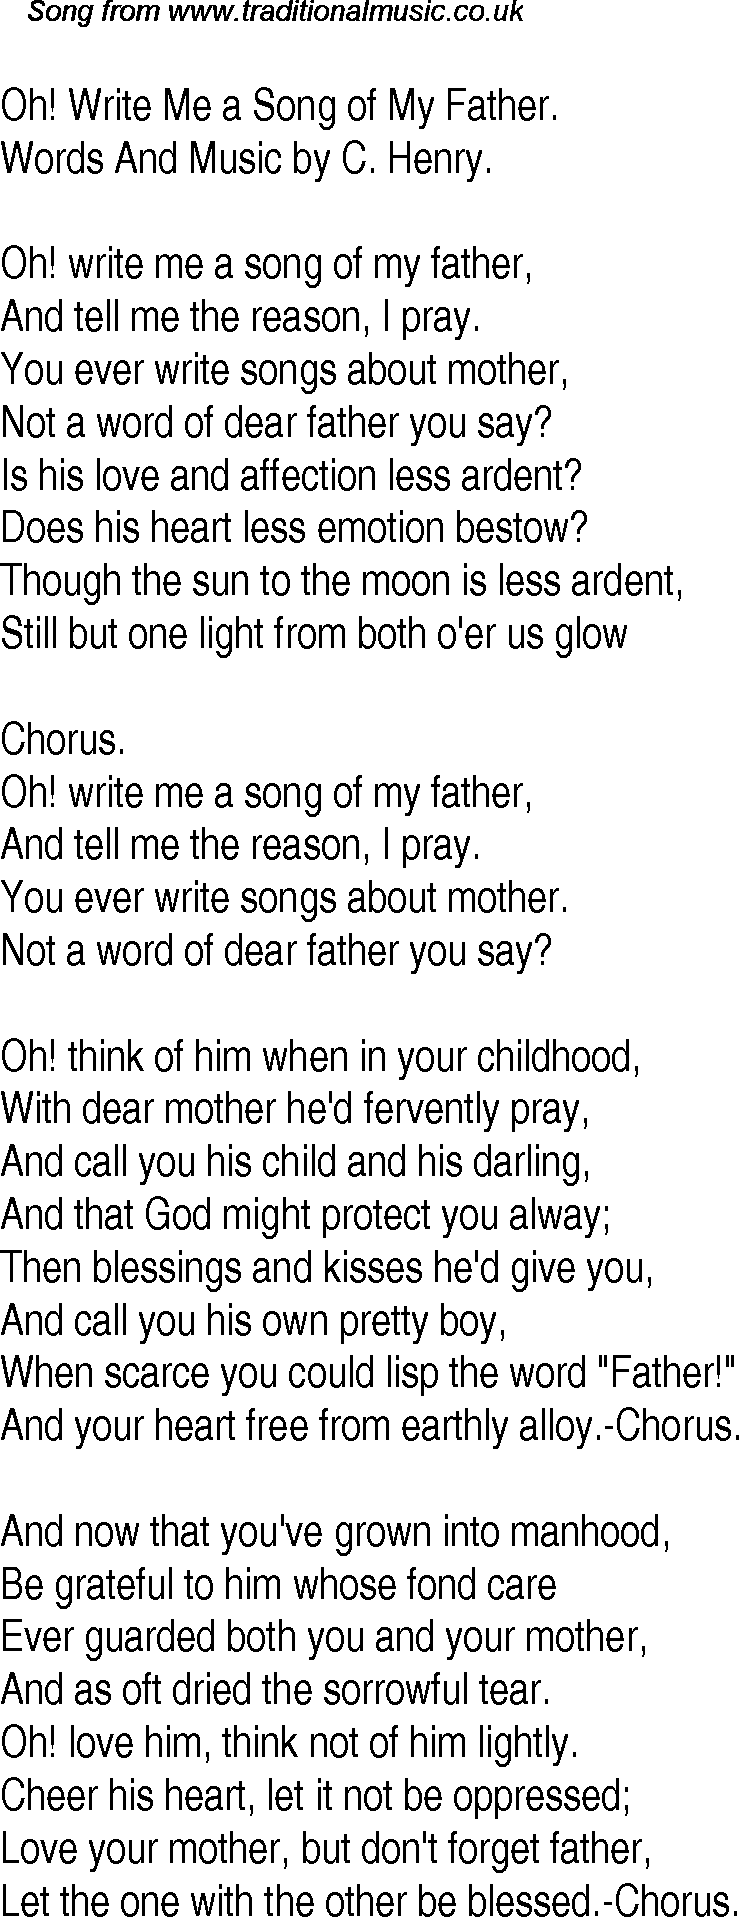 Old Time Song Lyrics for 23 Oh Write Me A Song Of My Father